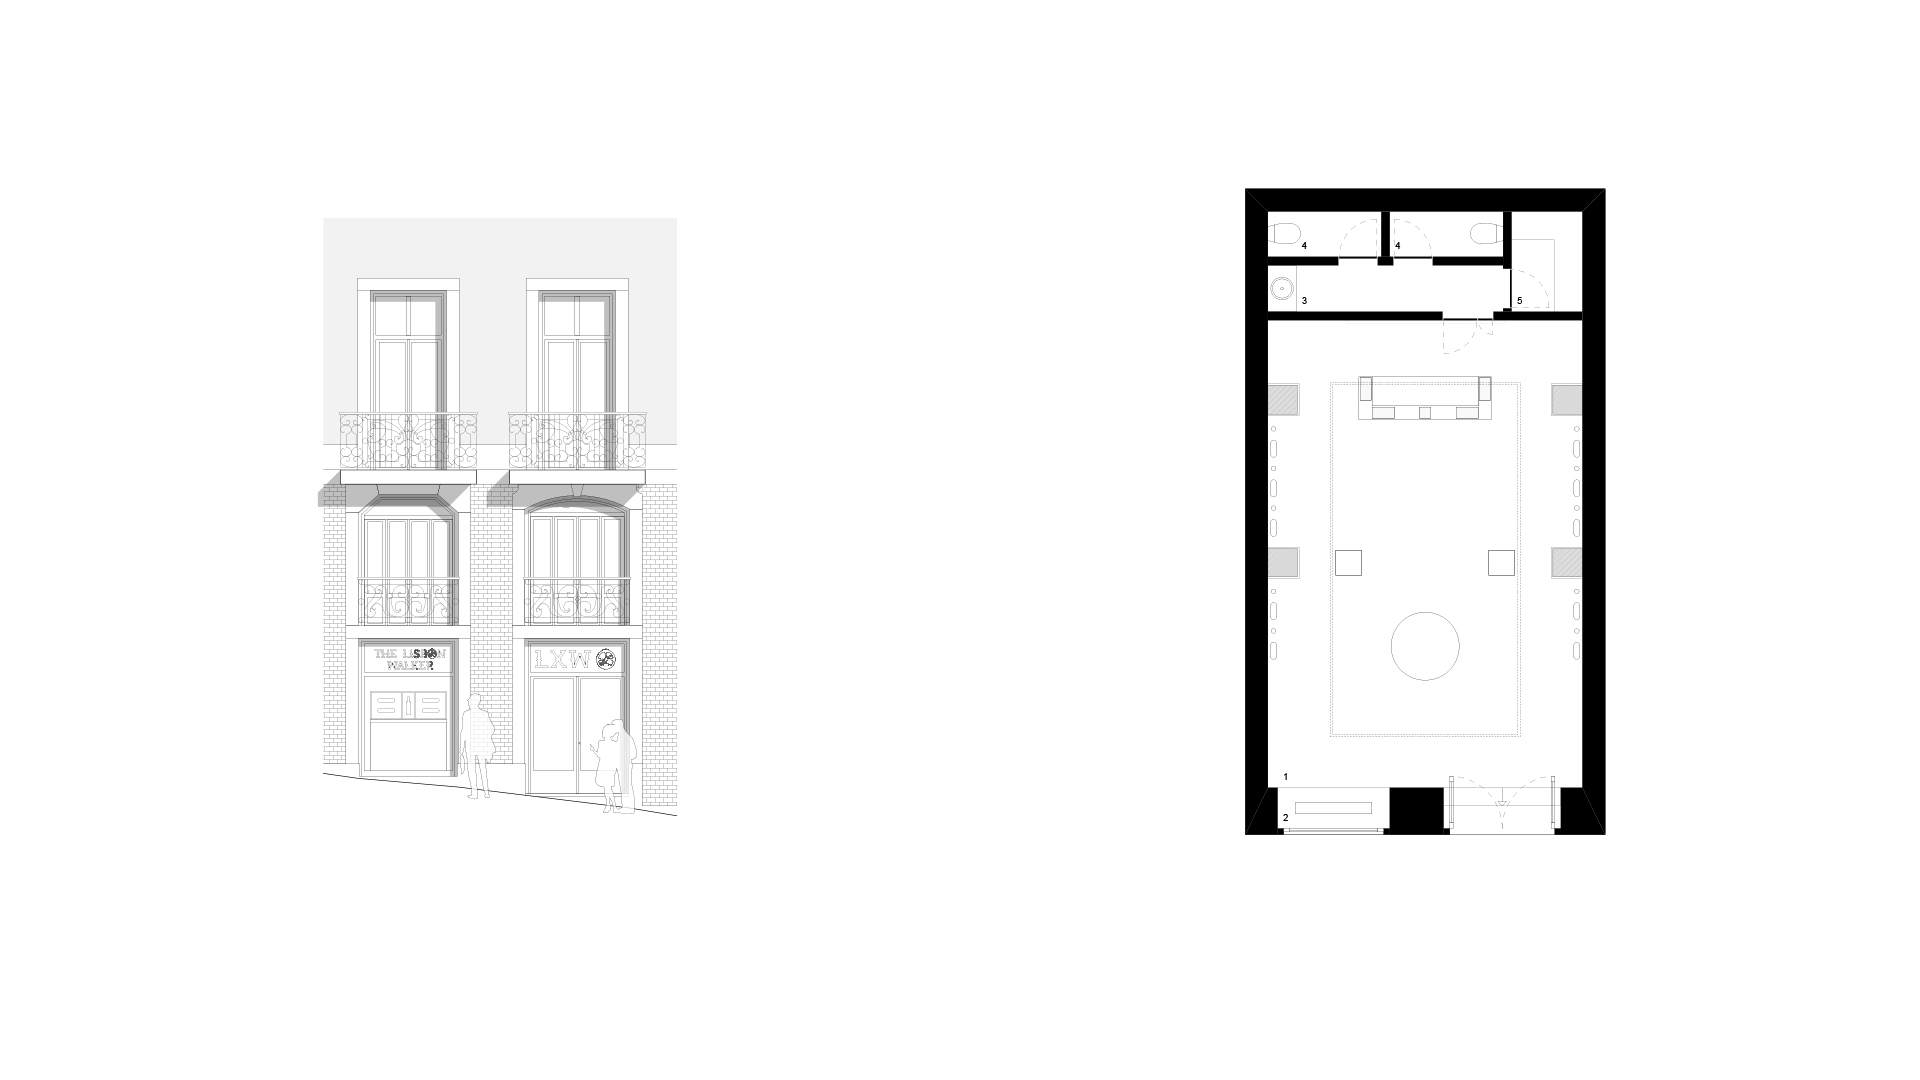 ELEVATION AND FLOOR PLAN _ 1 showroom . 2 store front . 3 hand rinse . 4 toilet . 5 storage